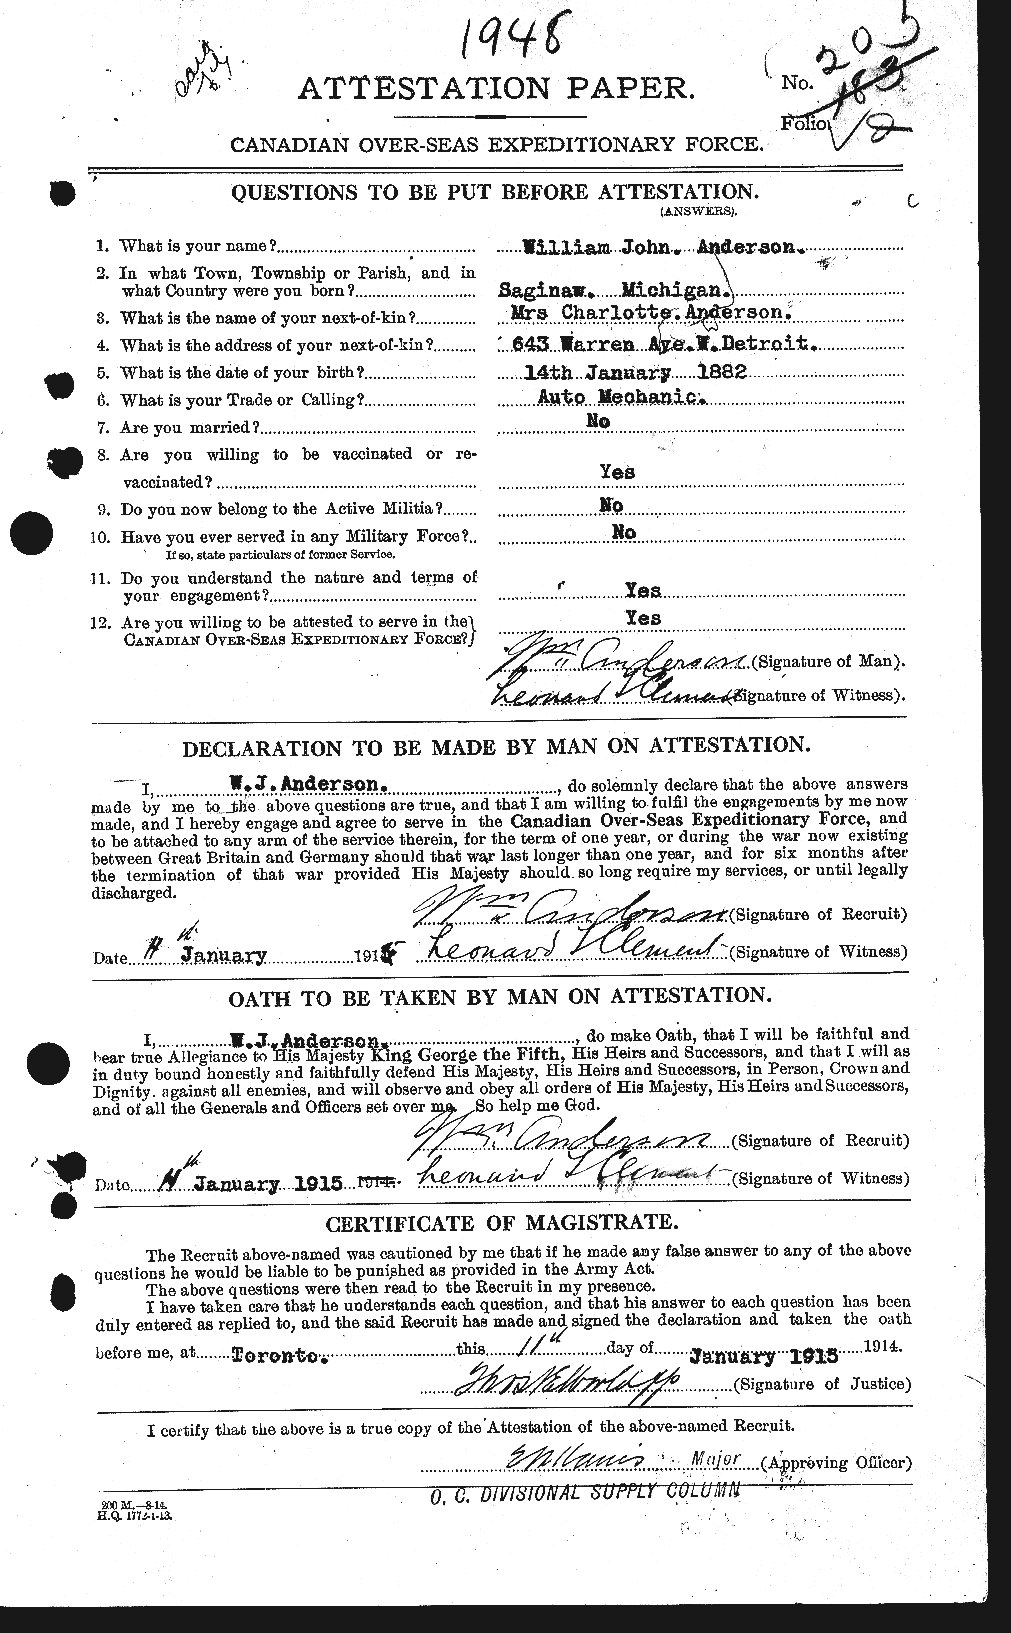 Personnel Records of the First World War - CEF 210818a